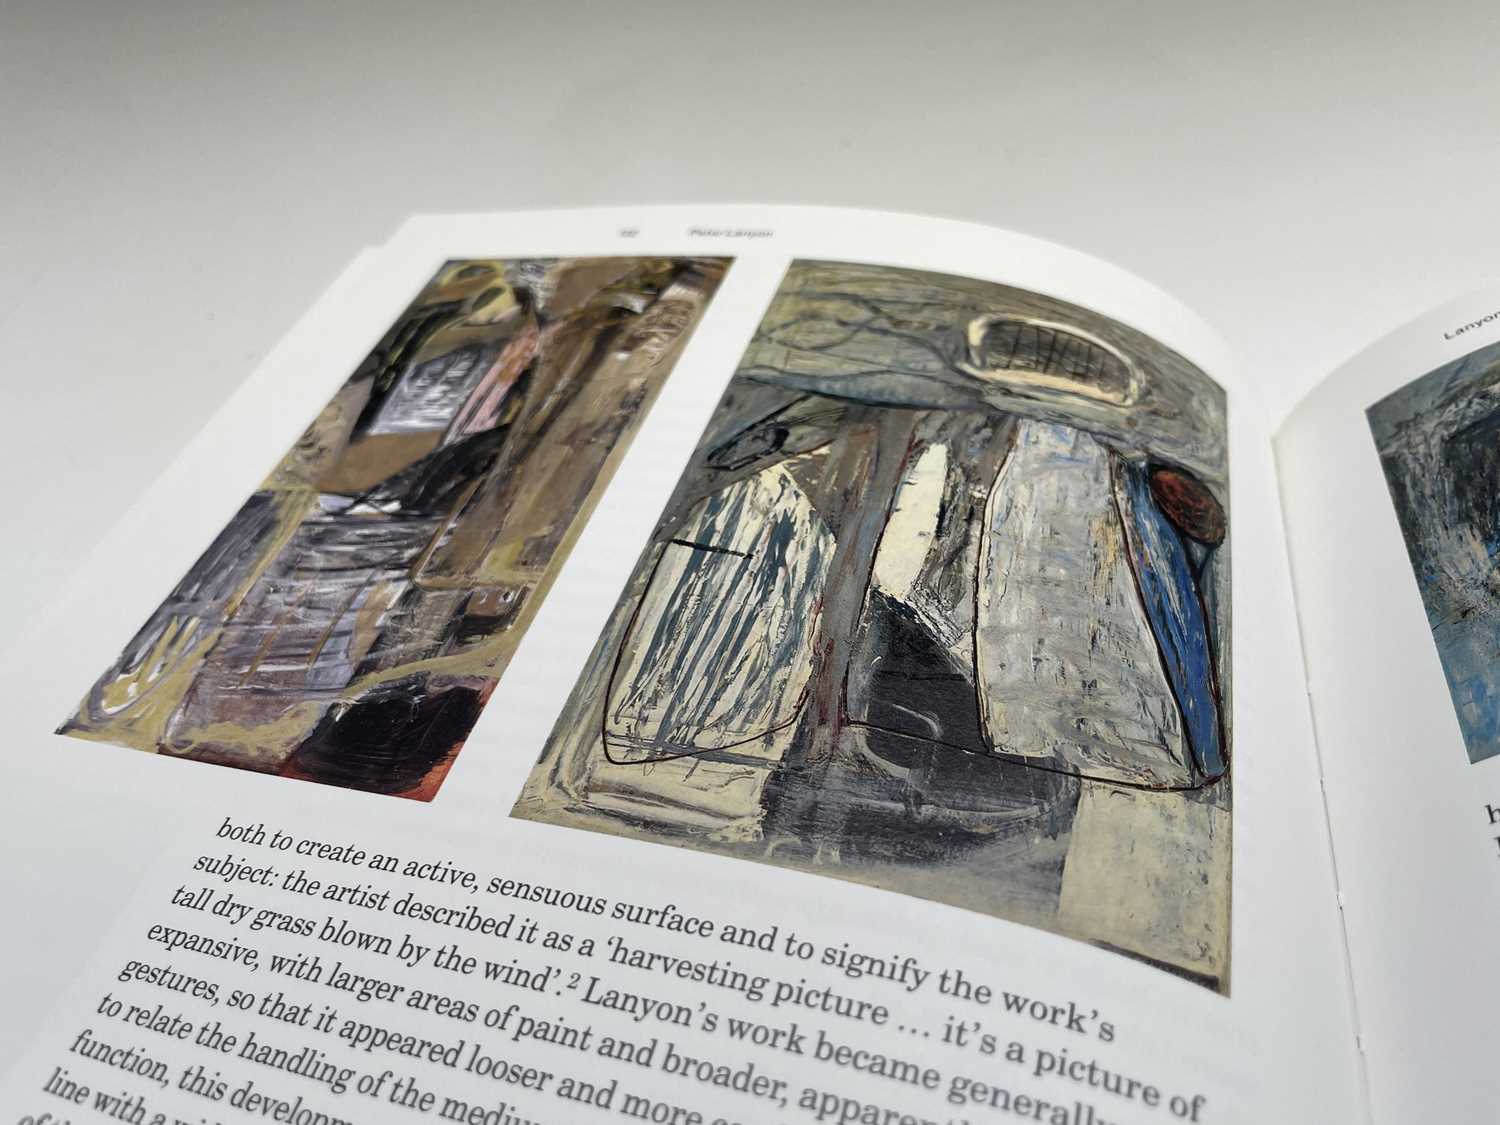 Peter Lanyon "At the edge of Landscape" Chris Stephens, first edition, 2000, hardback, worldwide - Image 3 of 5